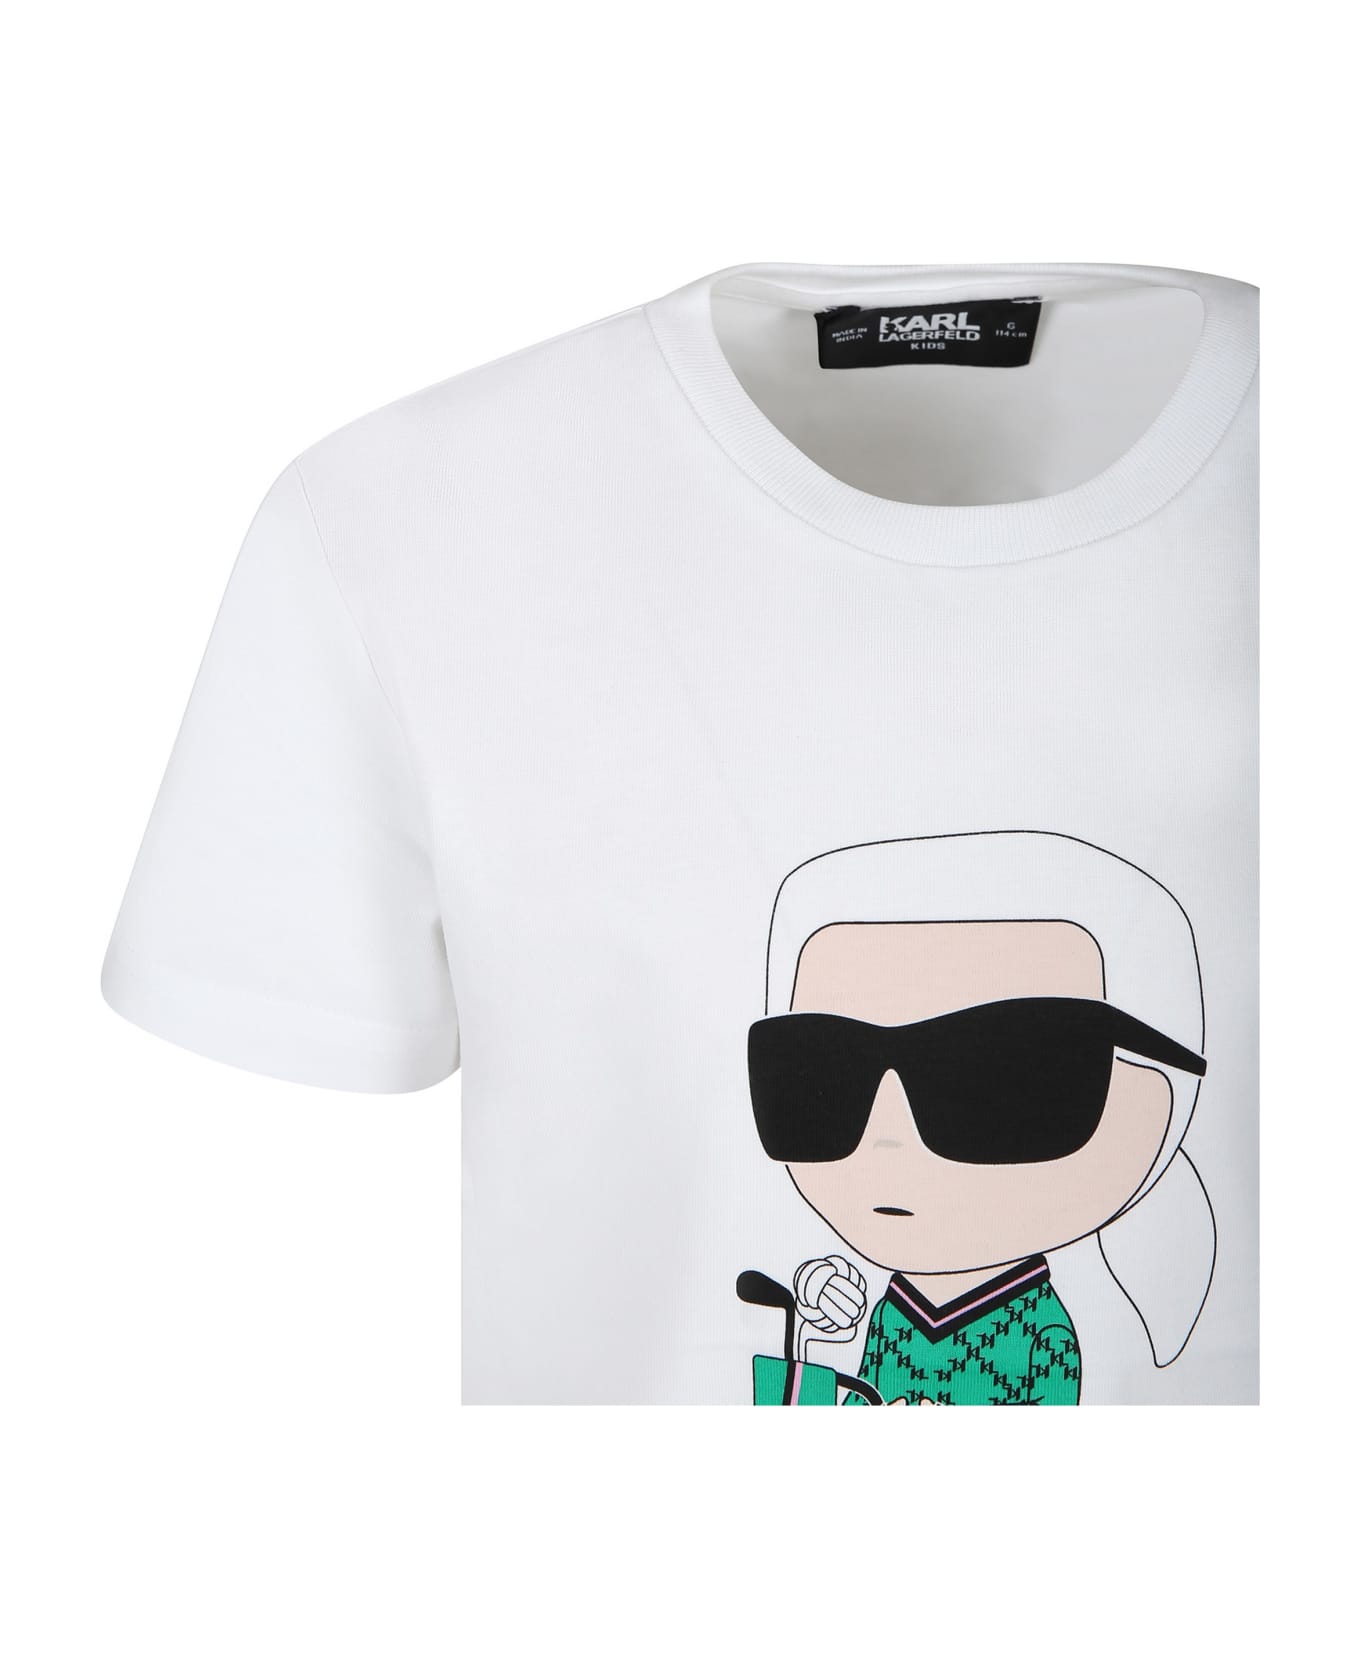 Karl Lagerfeld Kids White T-shirt For Kids With Karl And Golf Bag Print - White